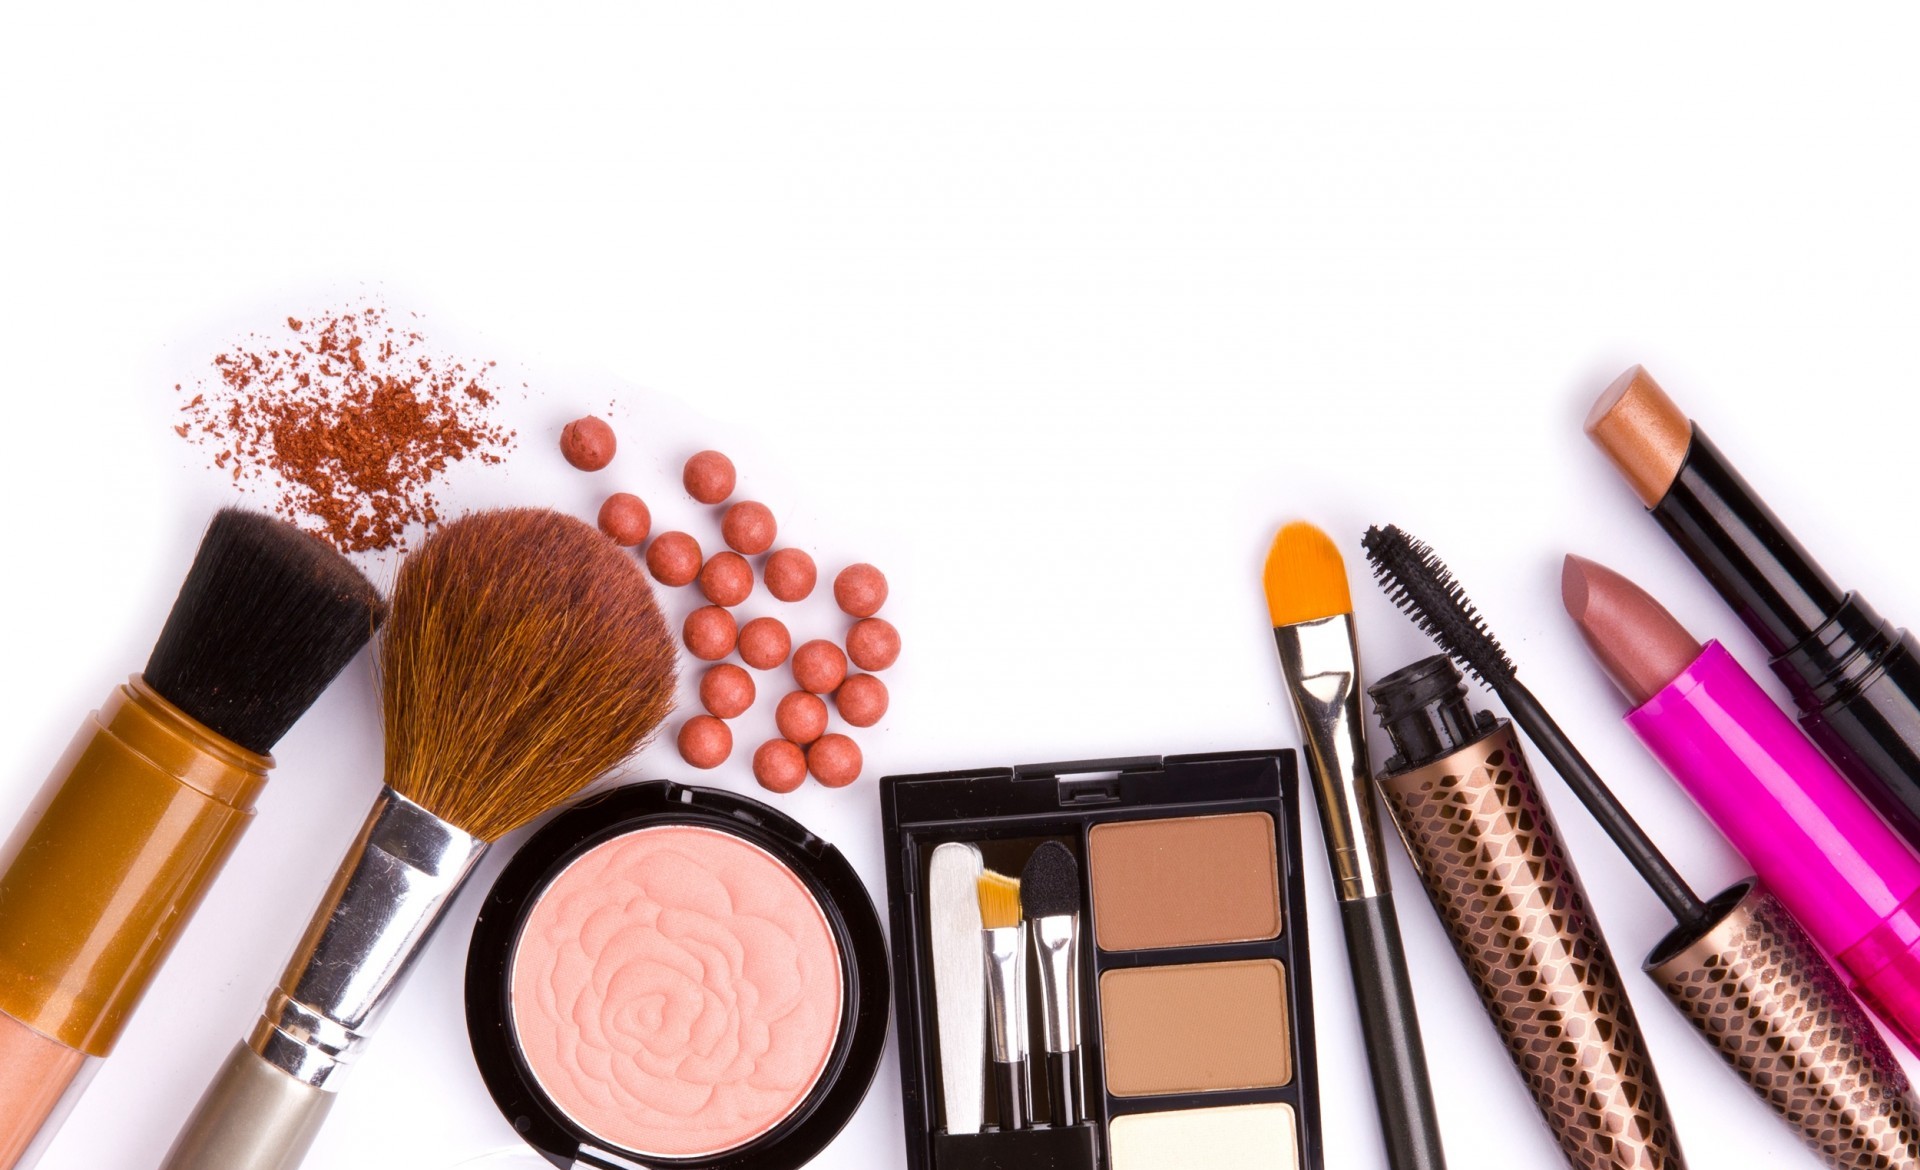 If makeup Is So Terrible, Why Don't Statistics Show It?